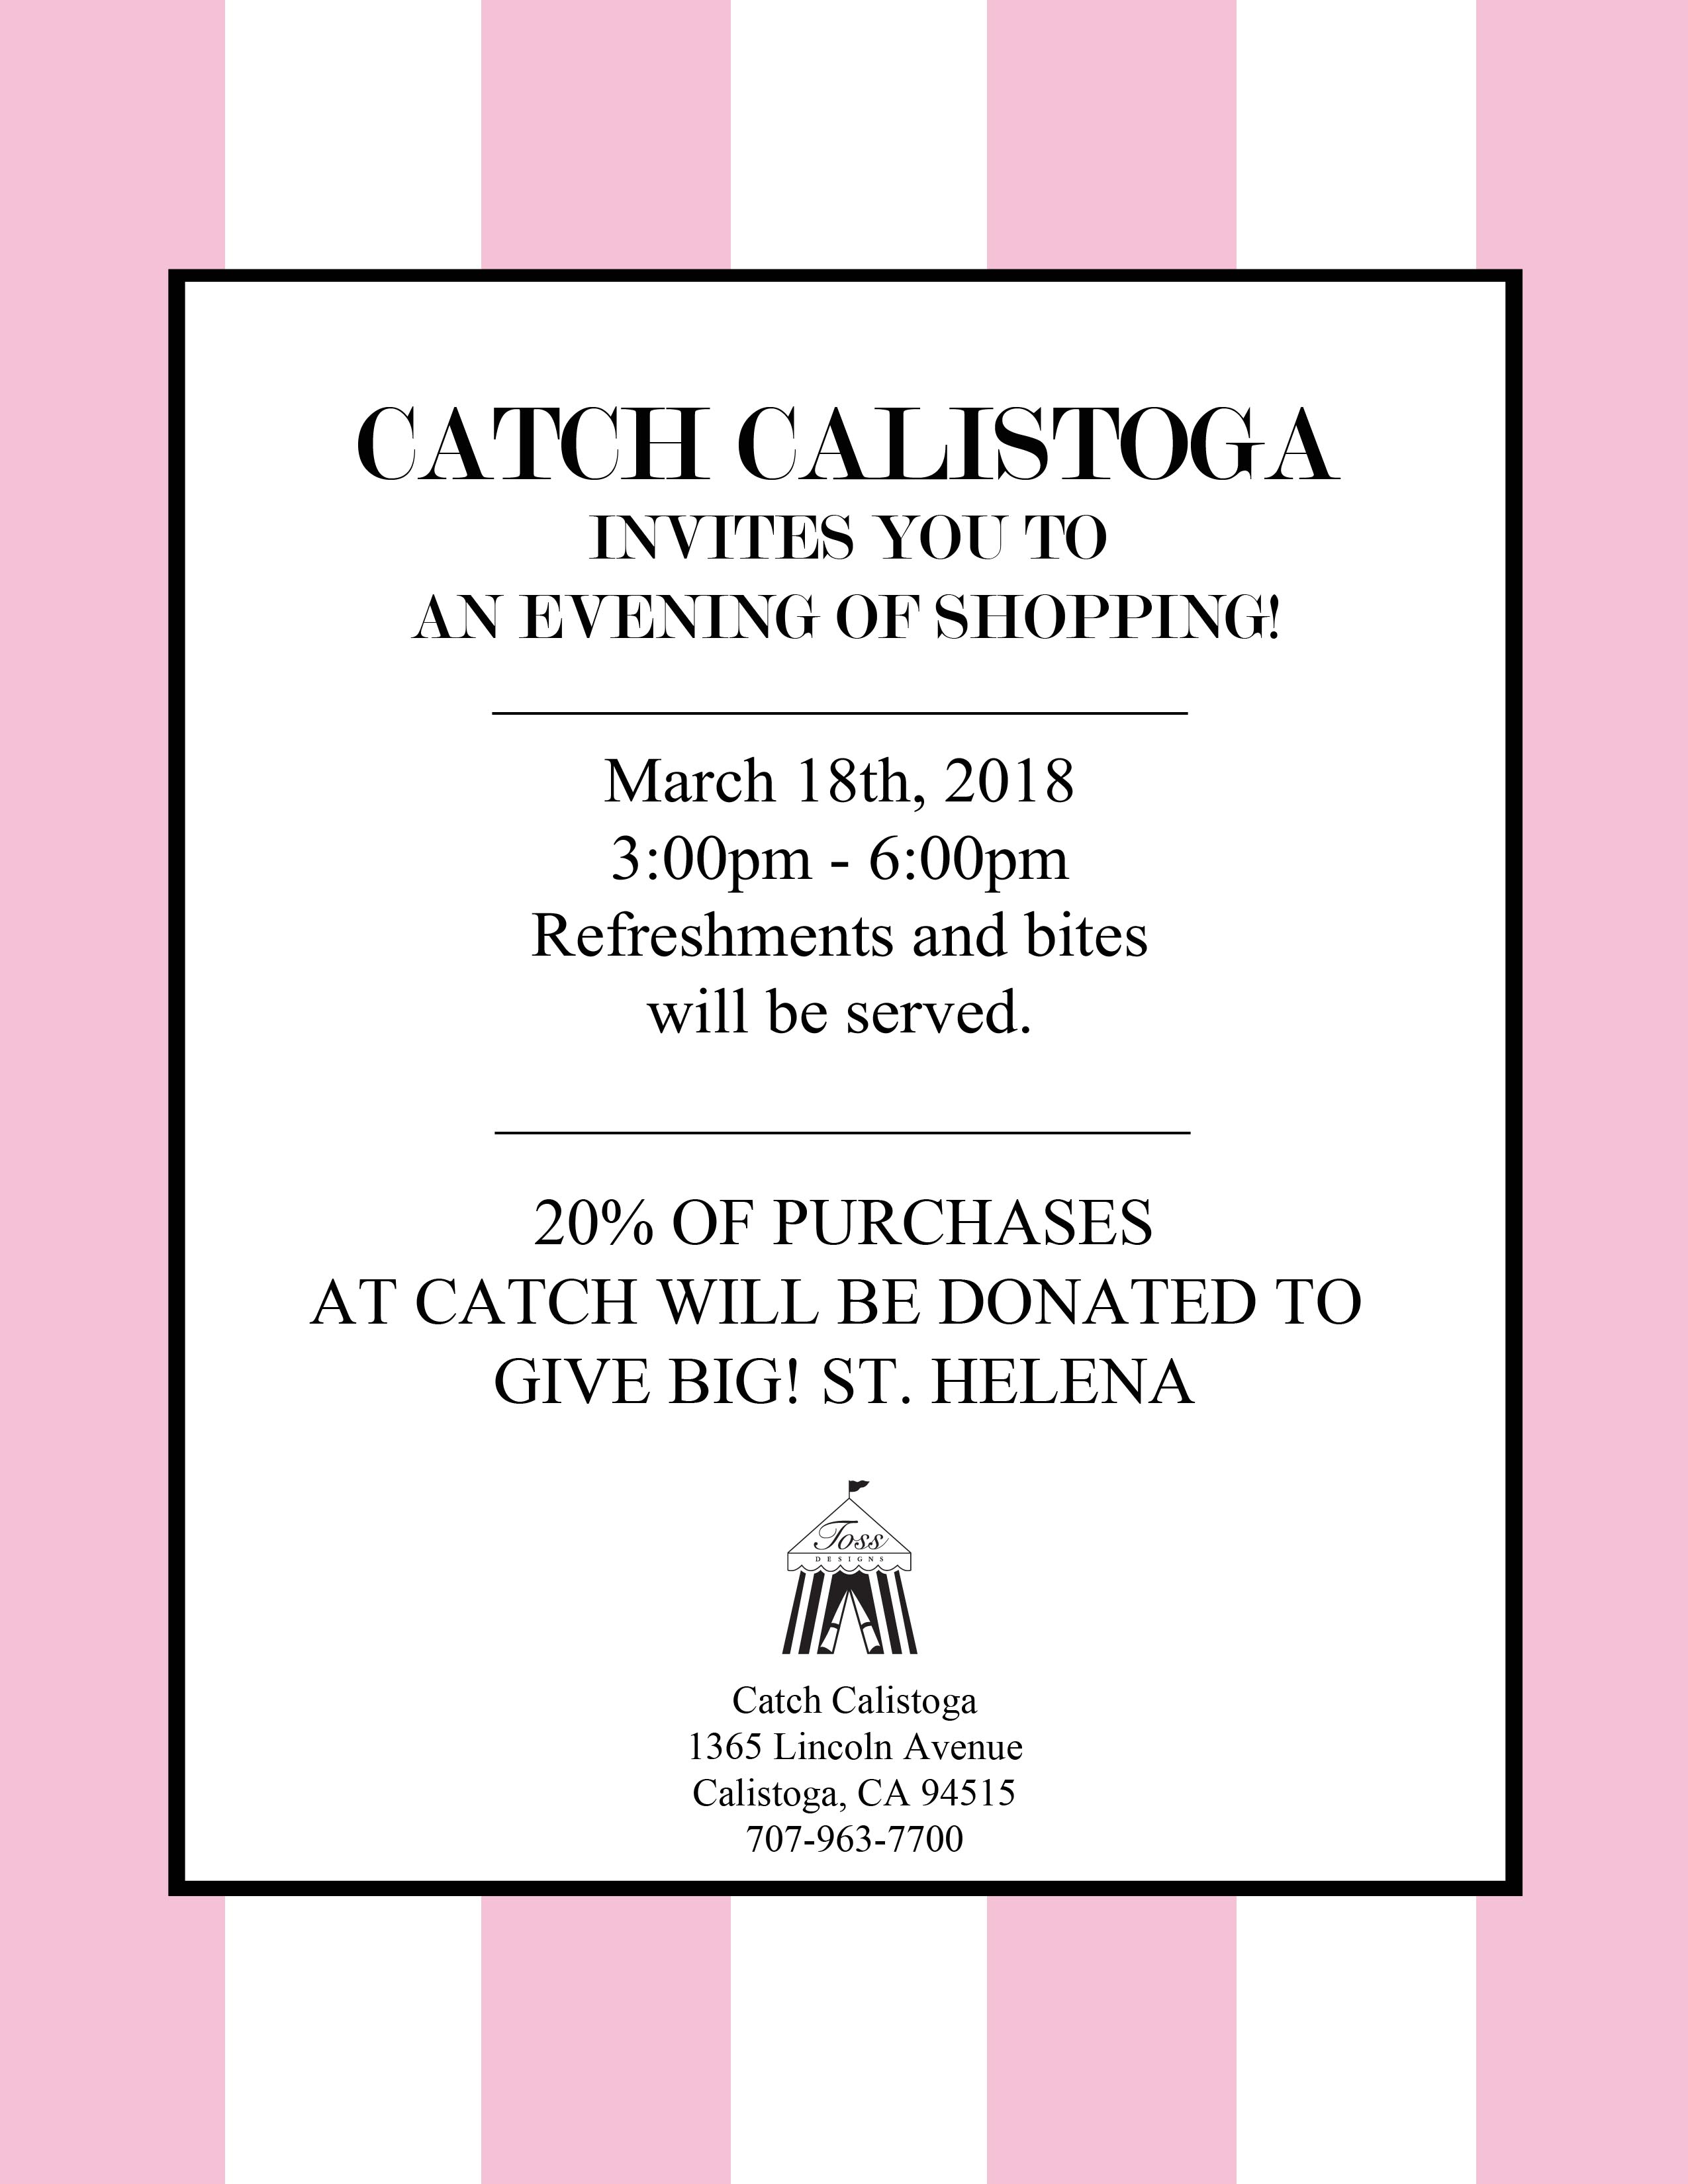 Give Big! Night of Shopping at Catch Calistoga